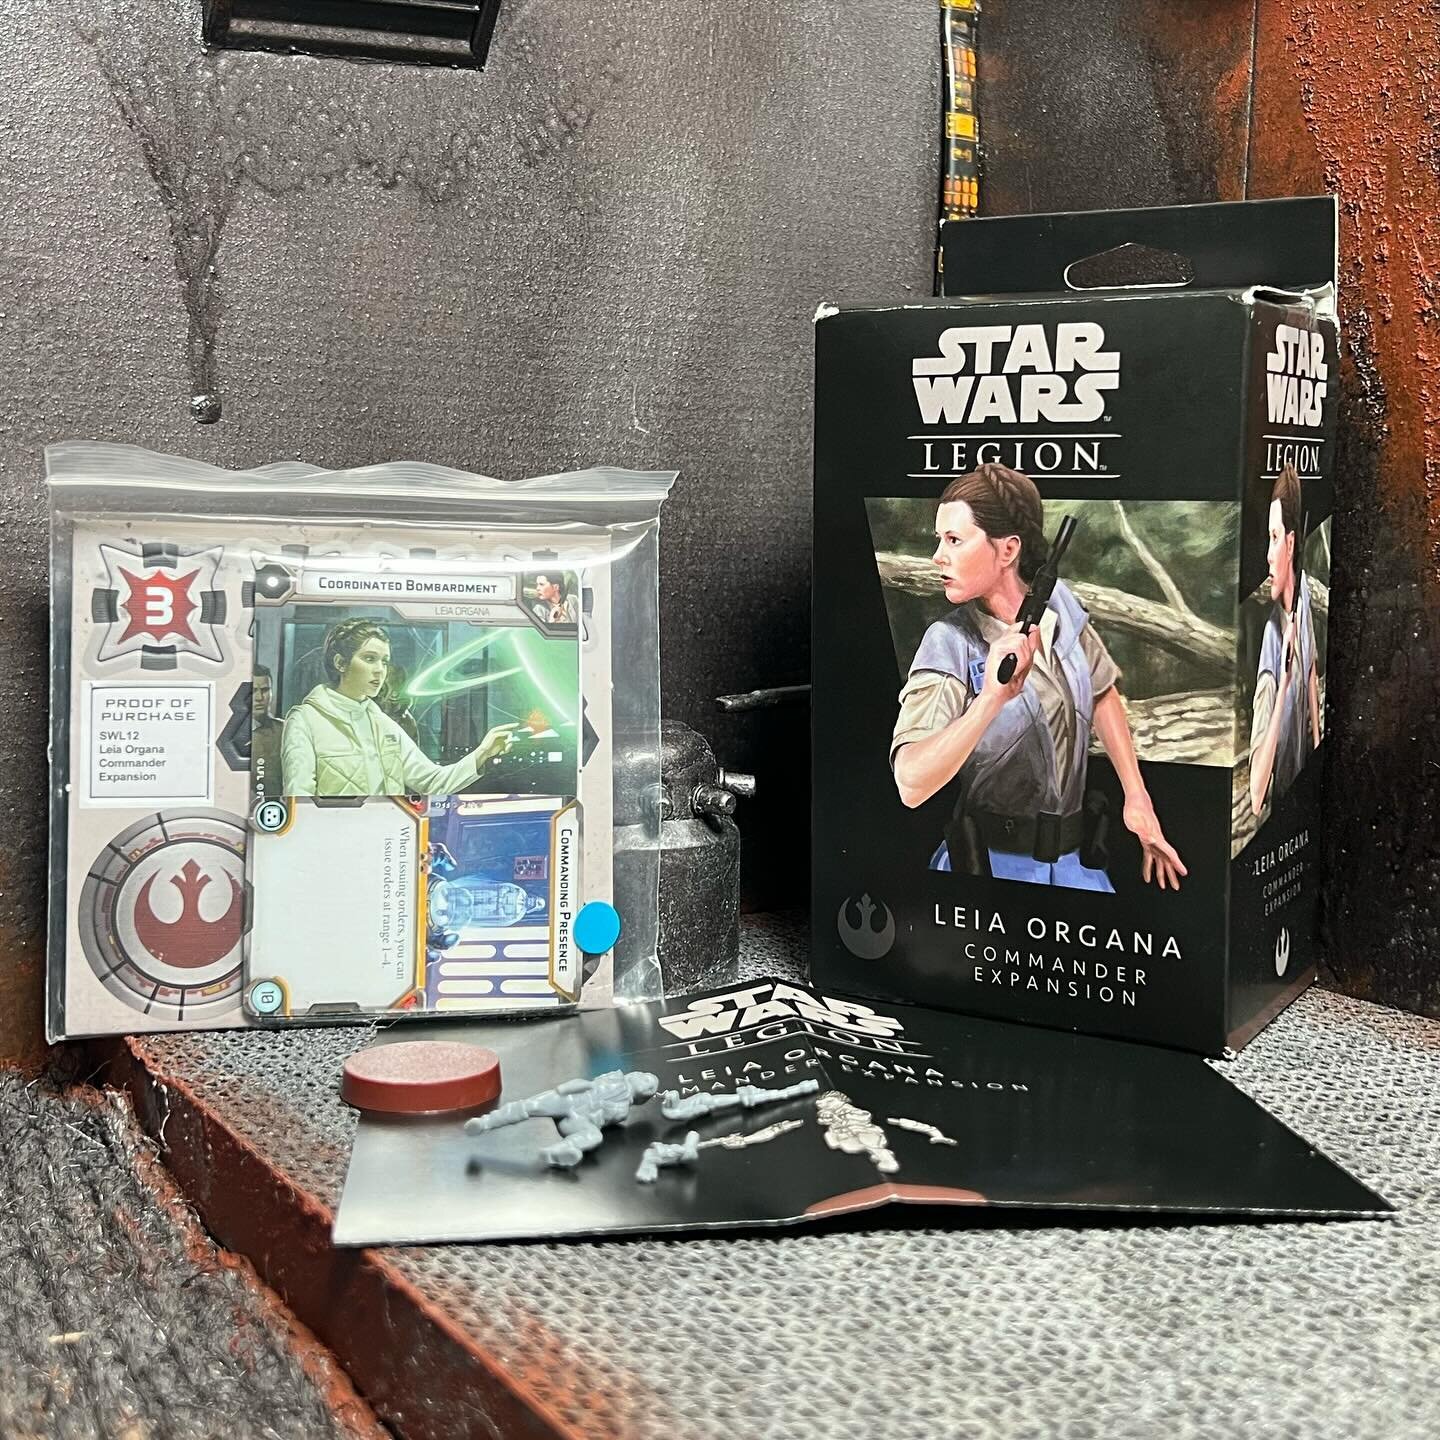 And now we play a game called, &quot;is this the beginning of an obsession that will cause Alyssa financial ruin?&quot; Only time will tell...

#starwarslegion #ohgodwhyamidoingthis #ohyeah #leiaorgana #duh #tabletopgaming #gameingcafe #thescavengers